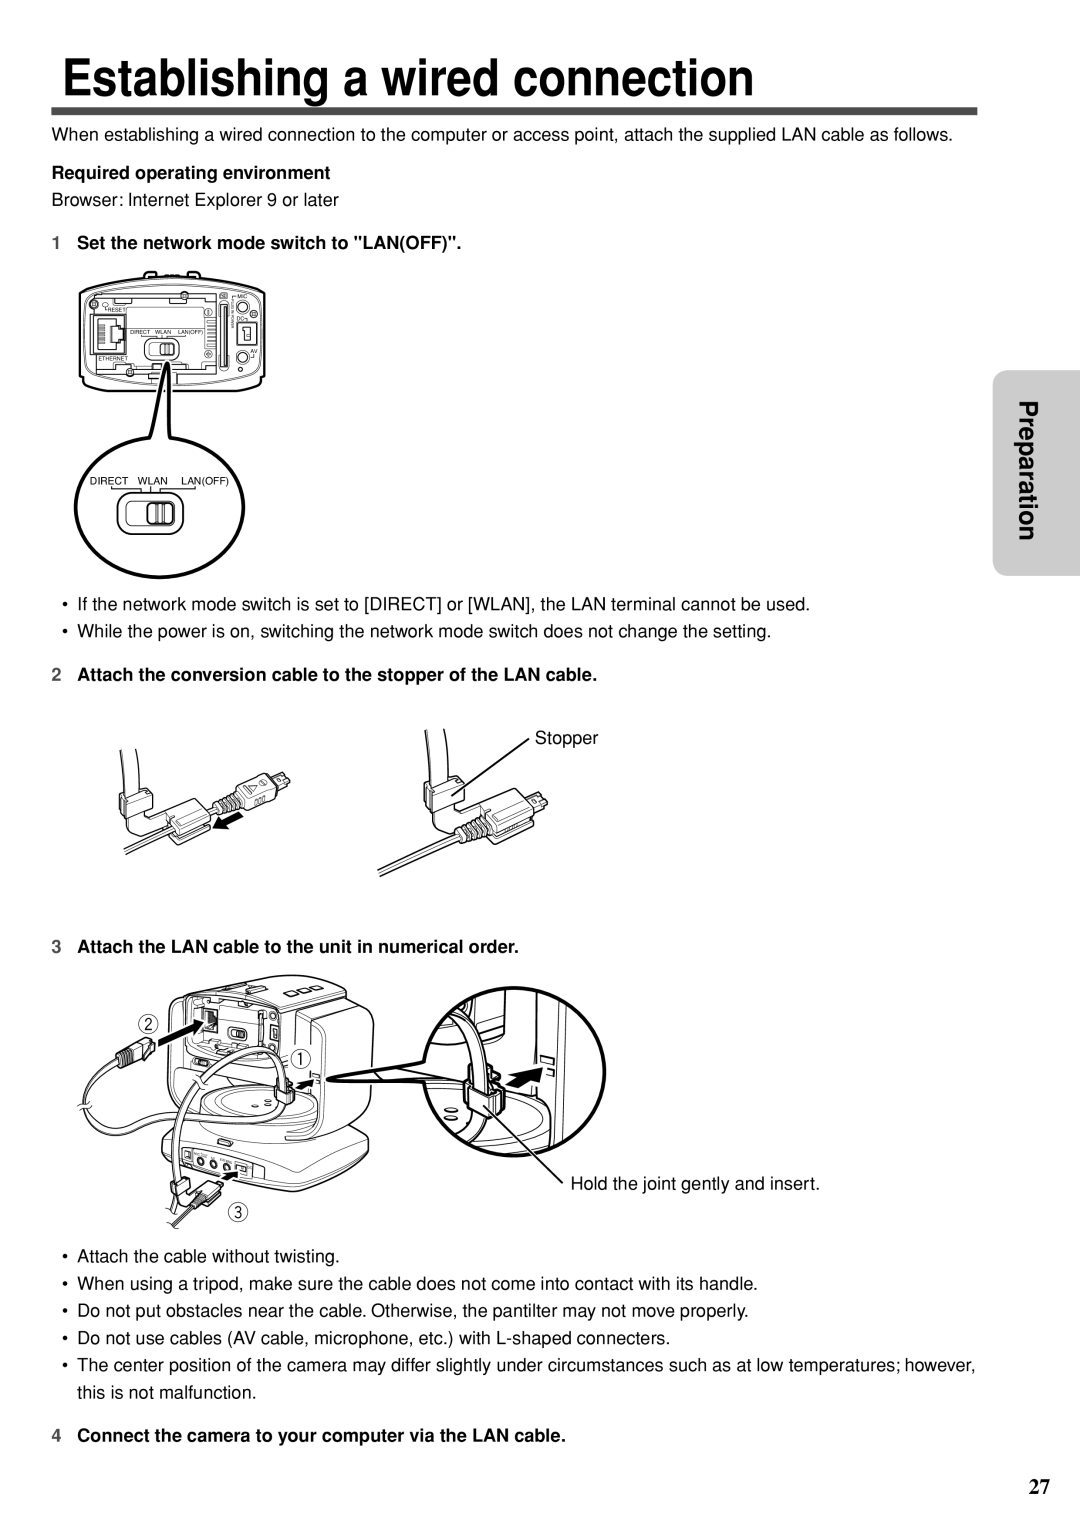 JVC GV-LS2 U manual Establishing a wired connection, Attach the conversion cable to the stopper of the LAN cable 